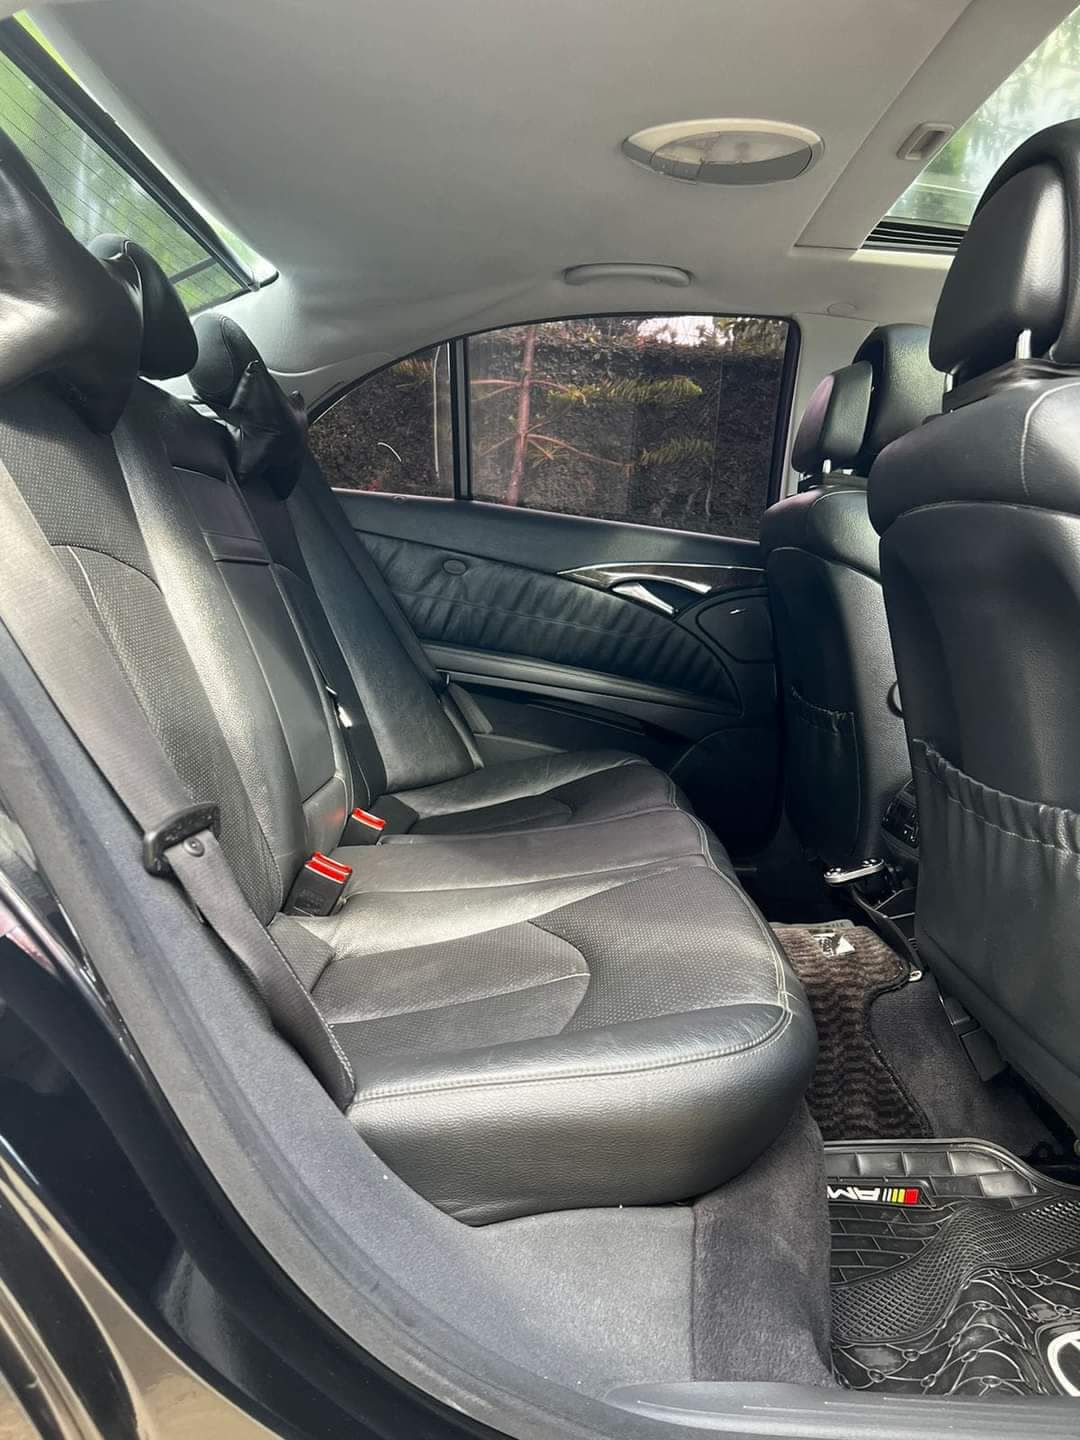 Mercedes Benz E350 SUNROOF CLEANEST You Pay 30% DEPOSIT Trade in OK